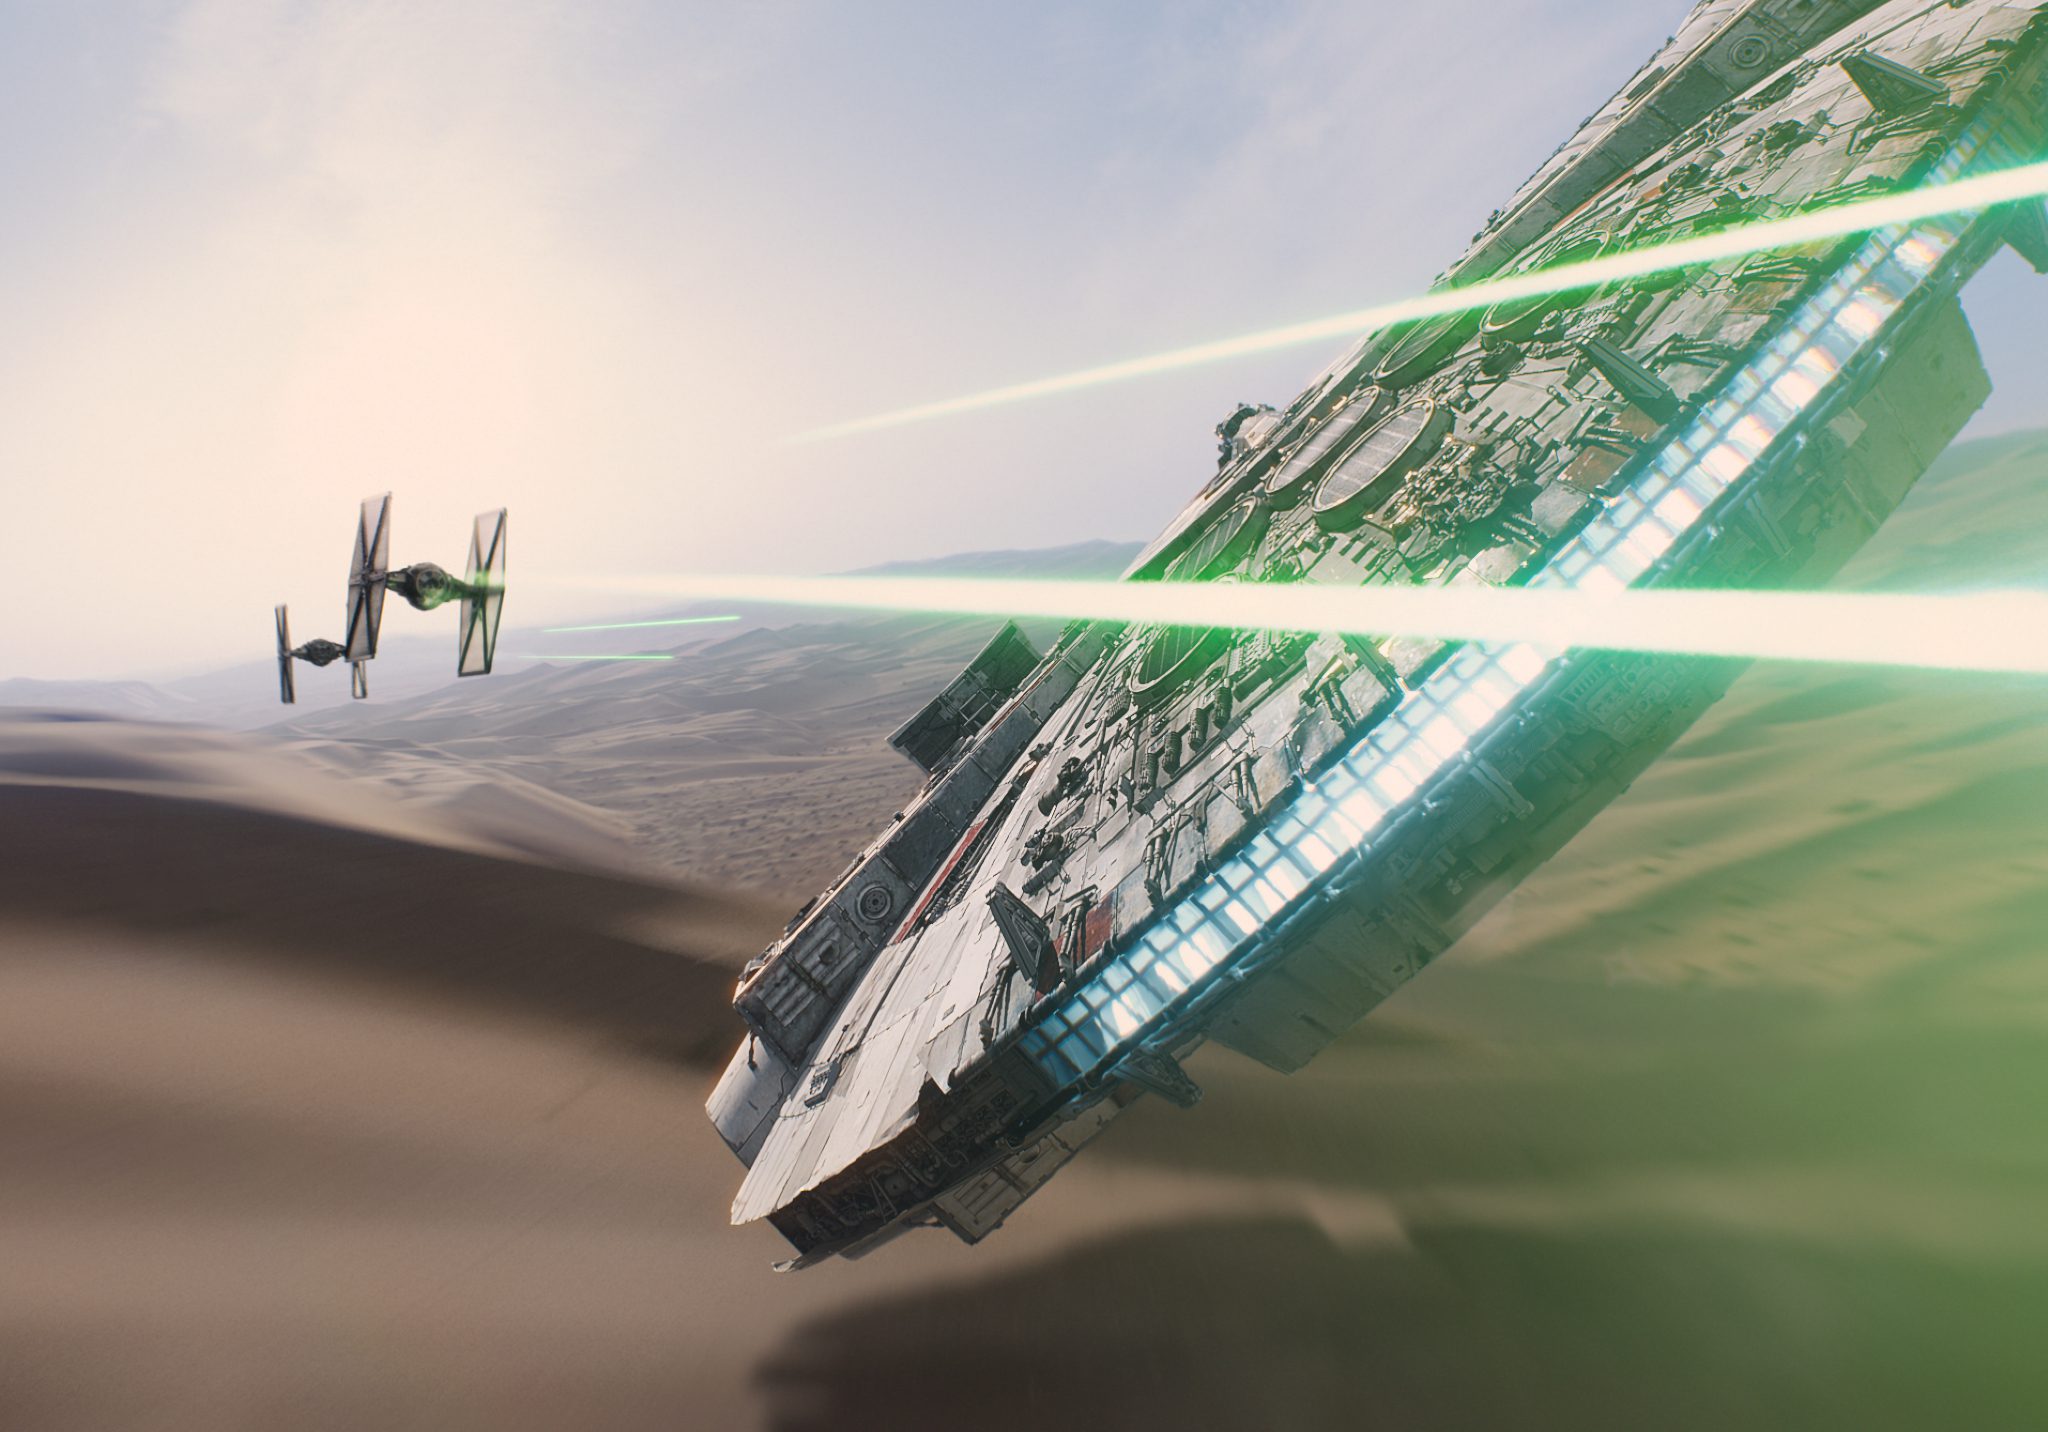 Get a First Look at Star Wars: The Force Awakens